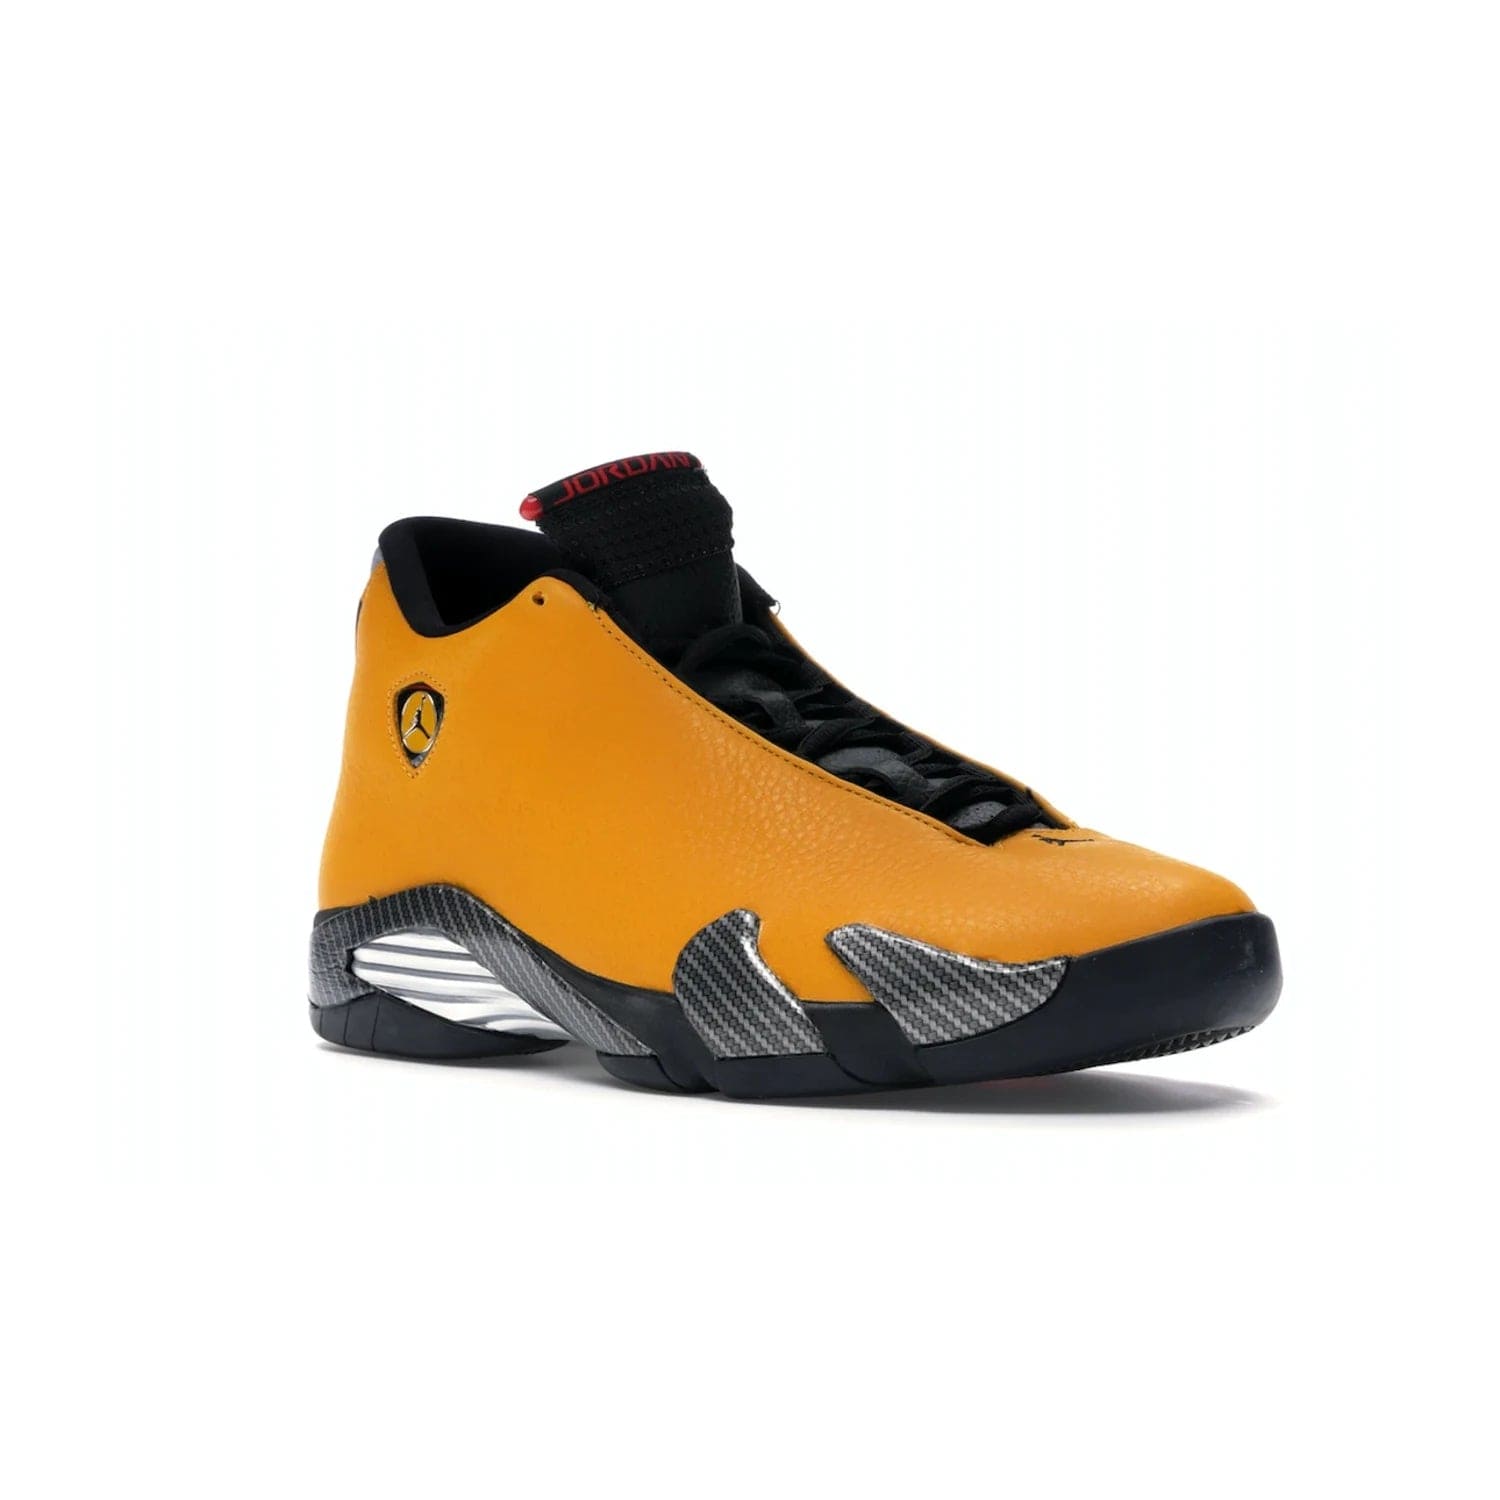 Jordan 14 Retro University Gold - Image 5 - Only at www.BallersClubKickz.com - Air Jordan 14 Retro University Gold: High-quality leather sneaker with Jumpman, tongue & heel logos. Zoom Air units & herringbone traction for superior comfort. University Gold outsole for stylish streetwear.